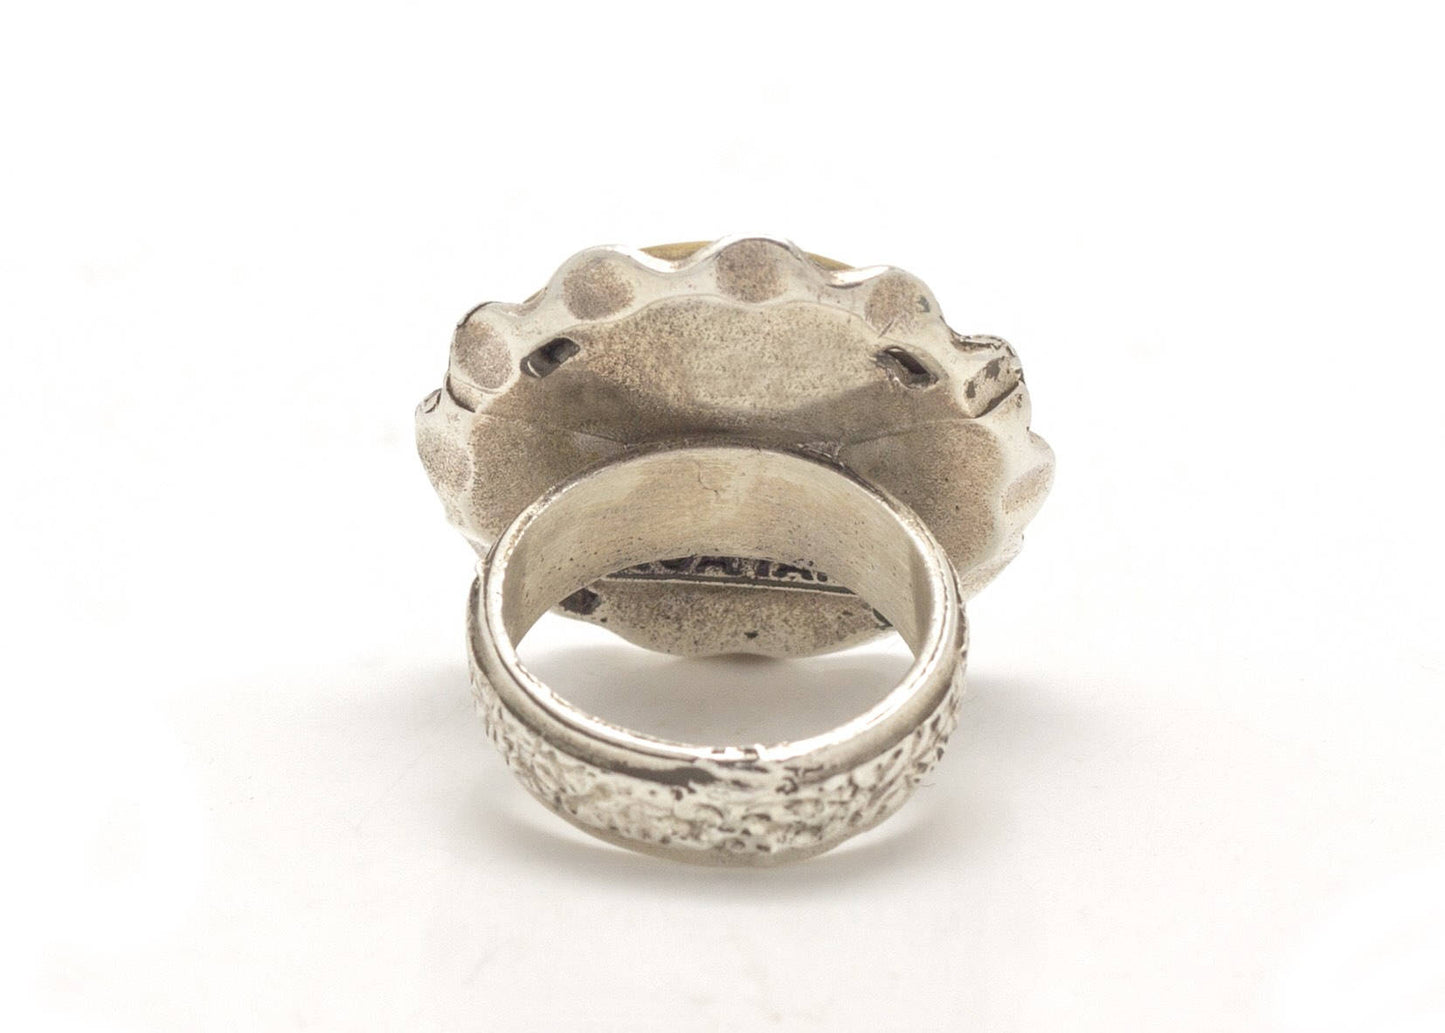 Coin ring with the 5 Cent coin of Netherlands with sterling silver ring